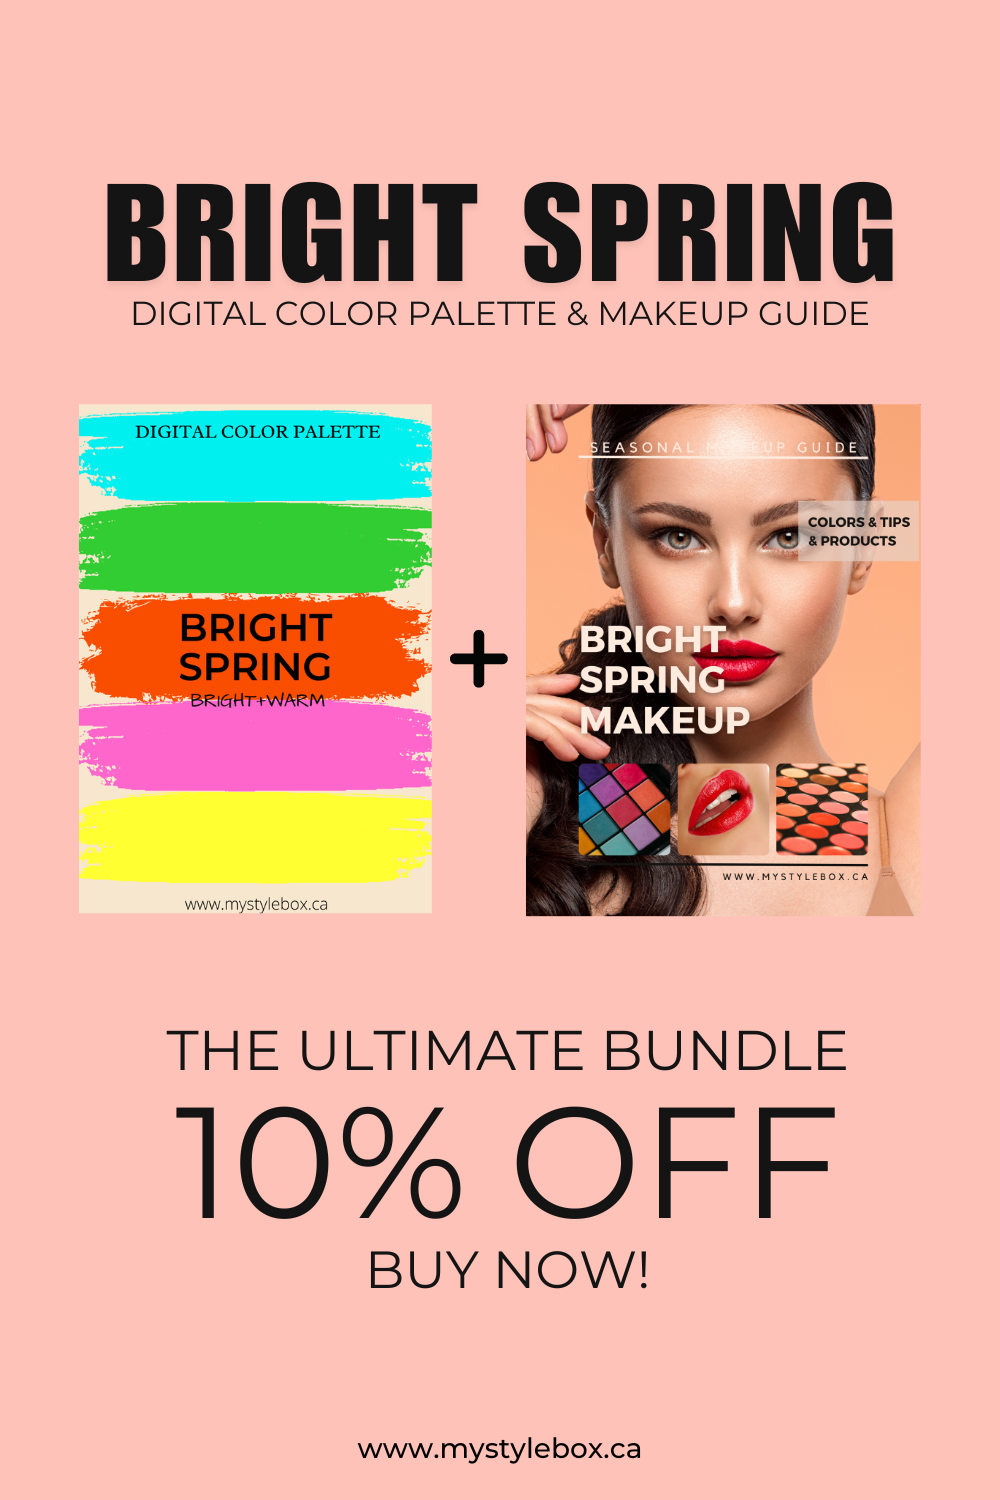 Bright Spring Digital Color Palette and Makeup Guide